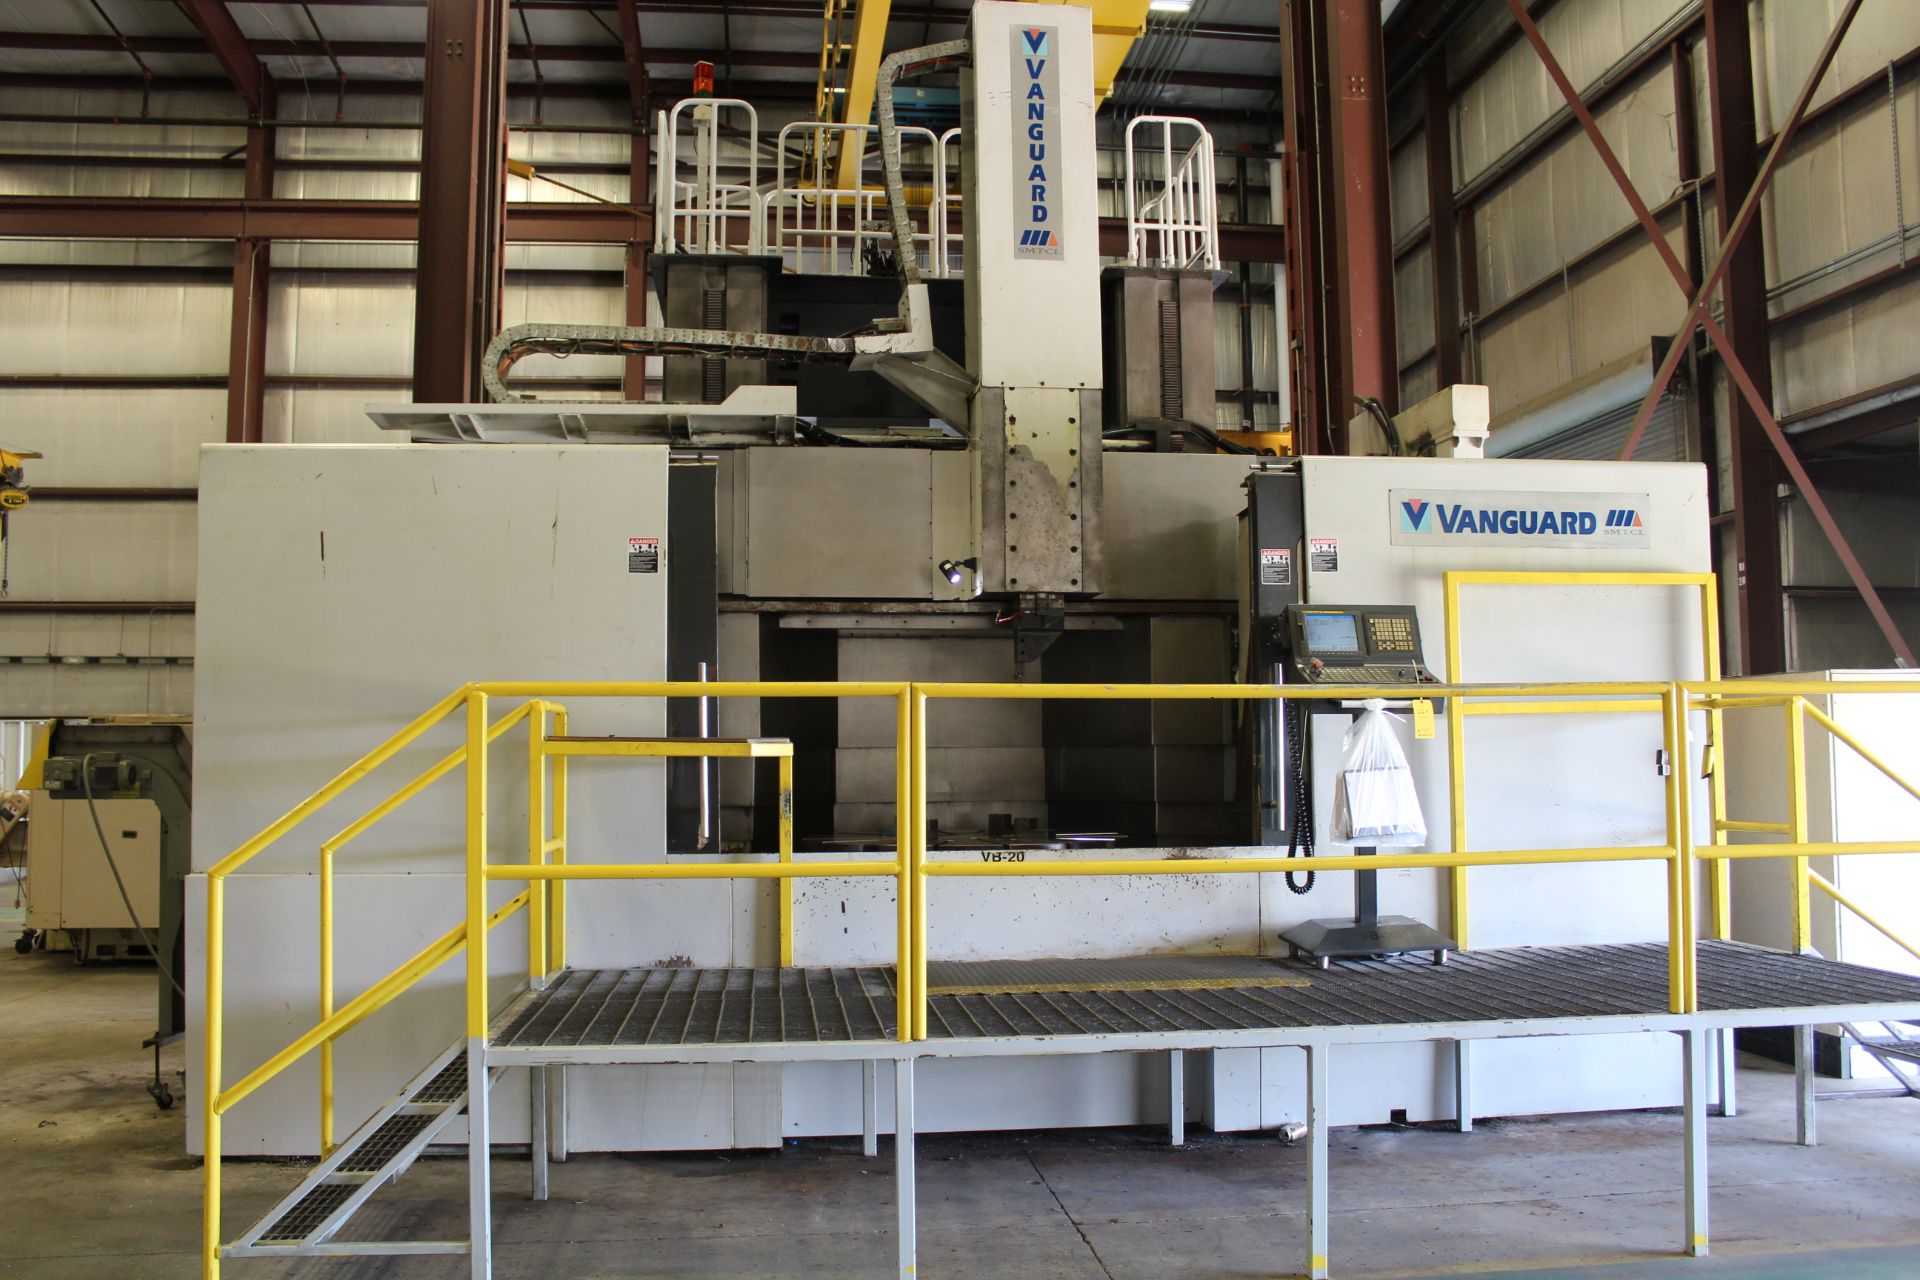 VANGUARD SMTCL GTC200160 CNC VERTICAL BORING MILL, 78" MAX TURNING DIA, 78" MAX TURNING HEIGHT, - Image 5 of 12